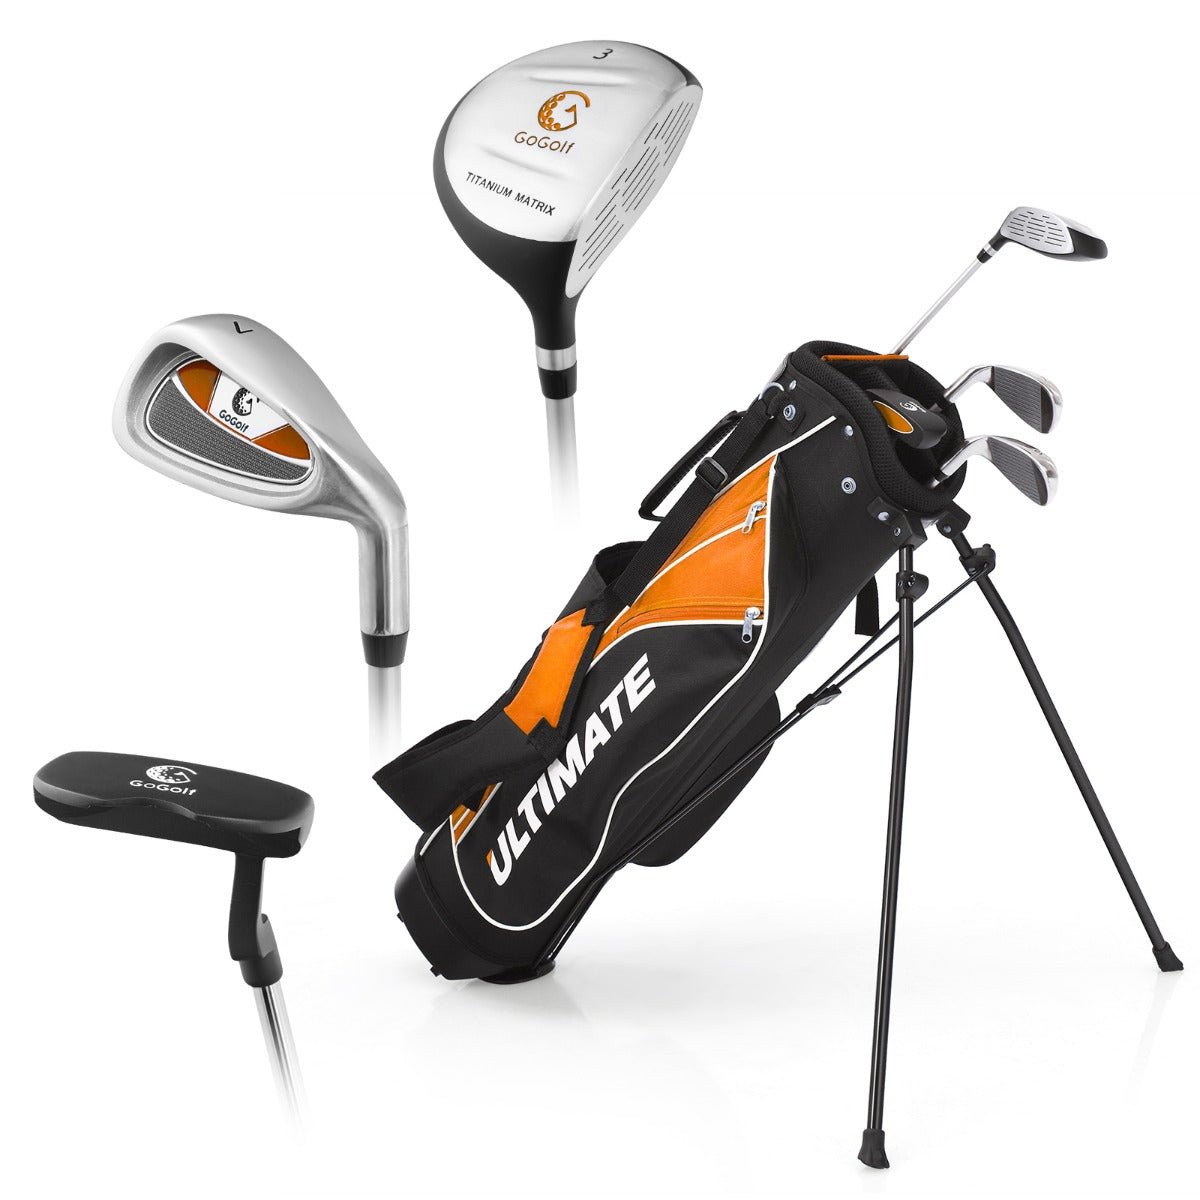 Junior Golf Clubs - Designed for Young Golf Enthusiasts